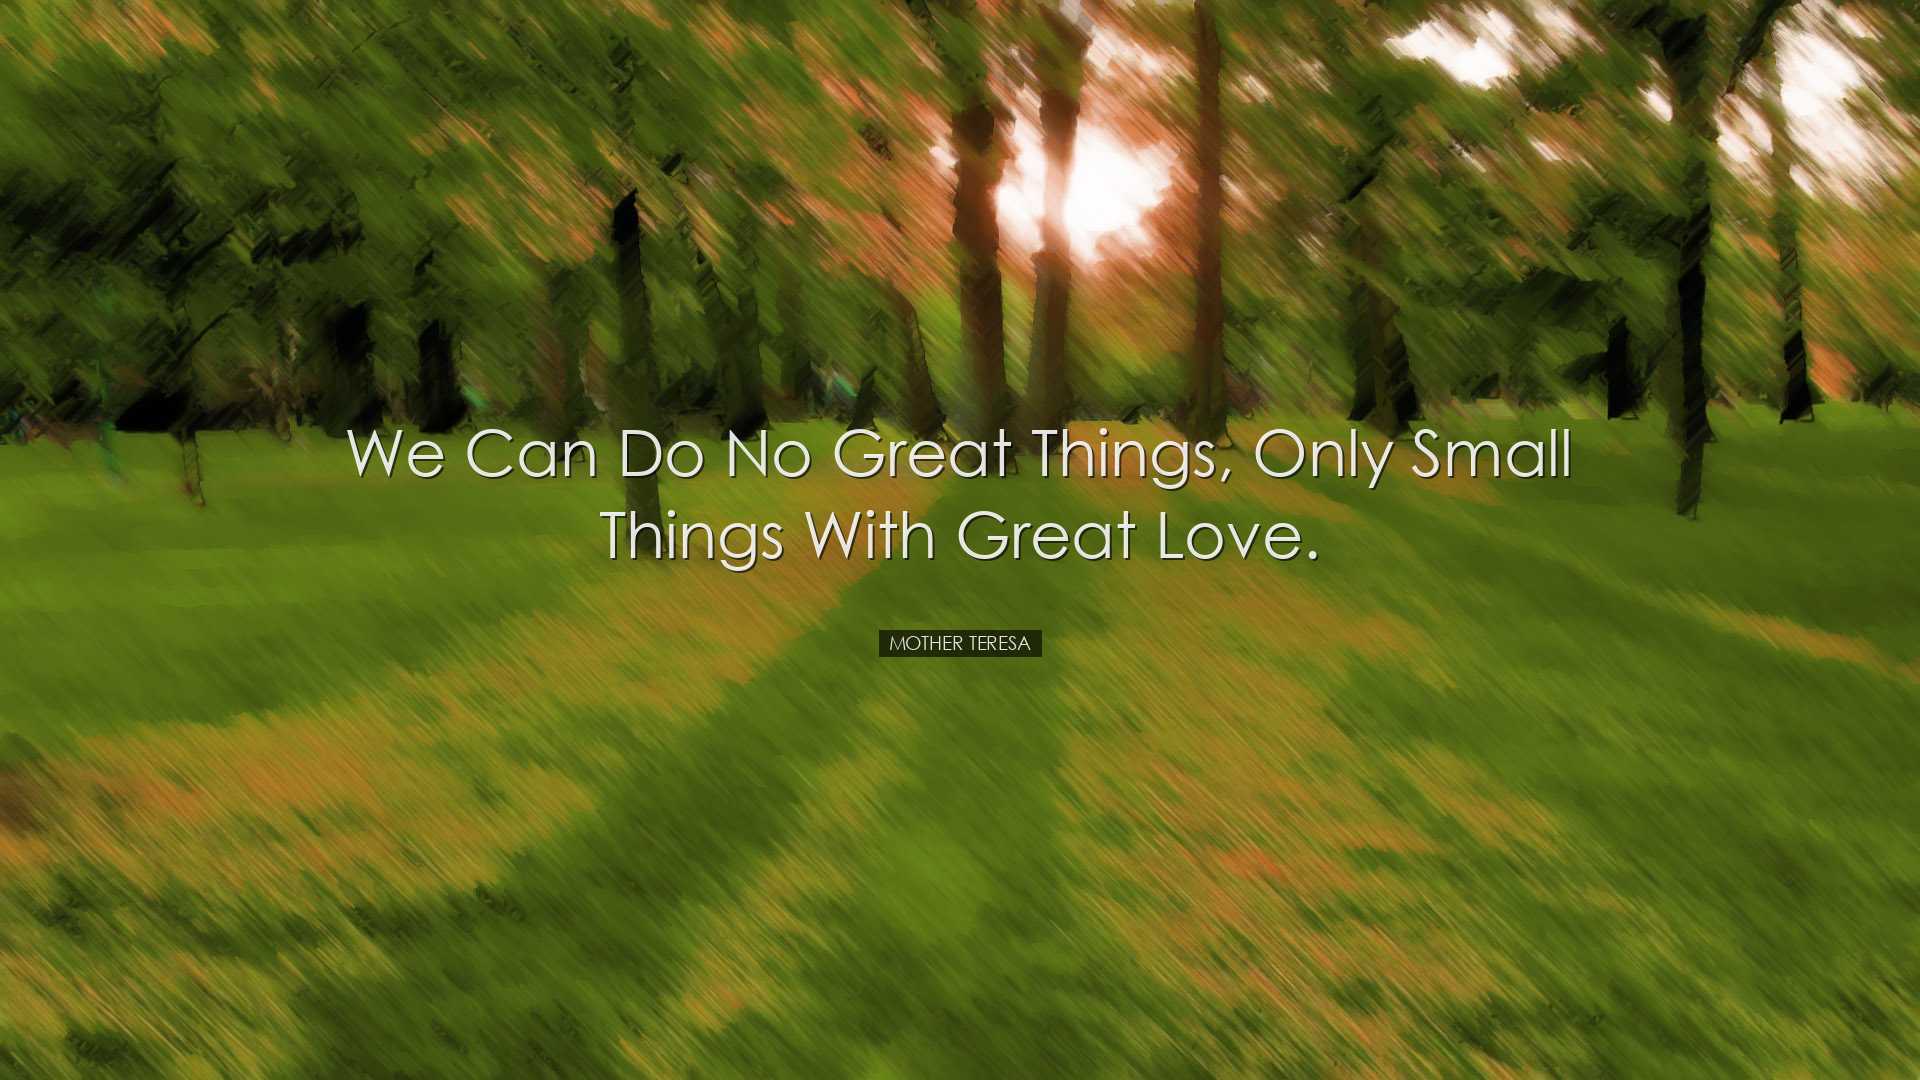 We can do no great things, only small things with great love. - Mo